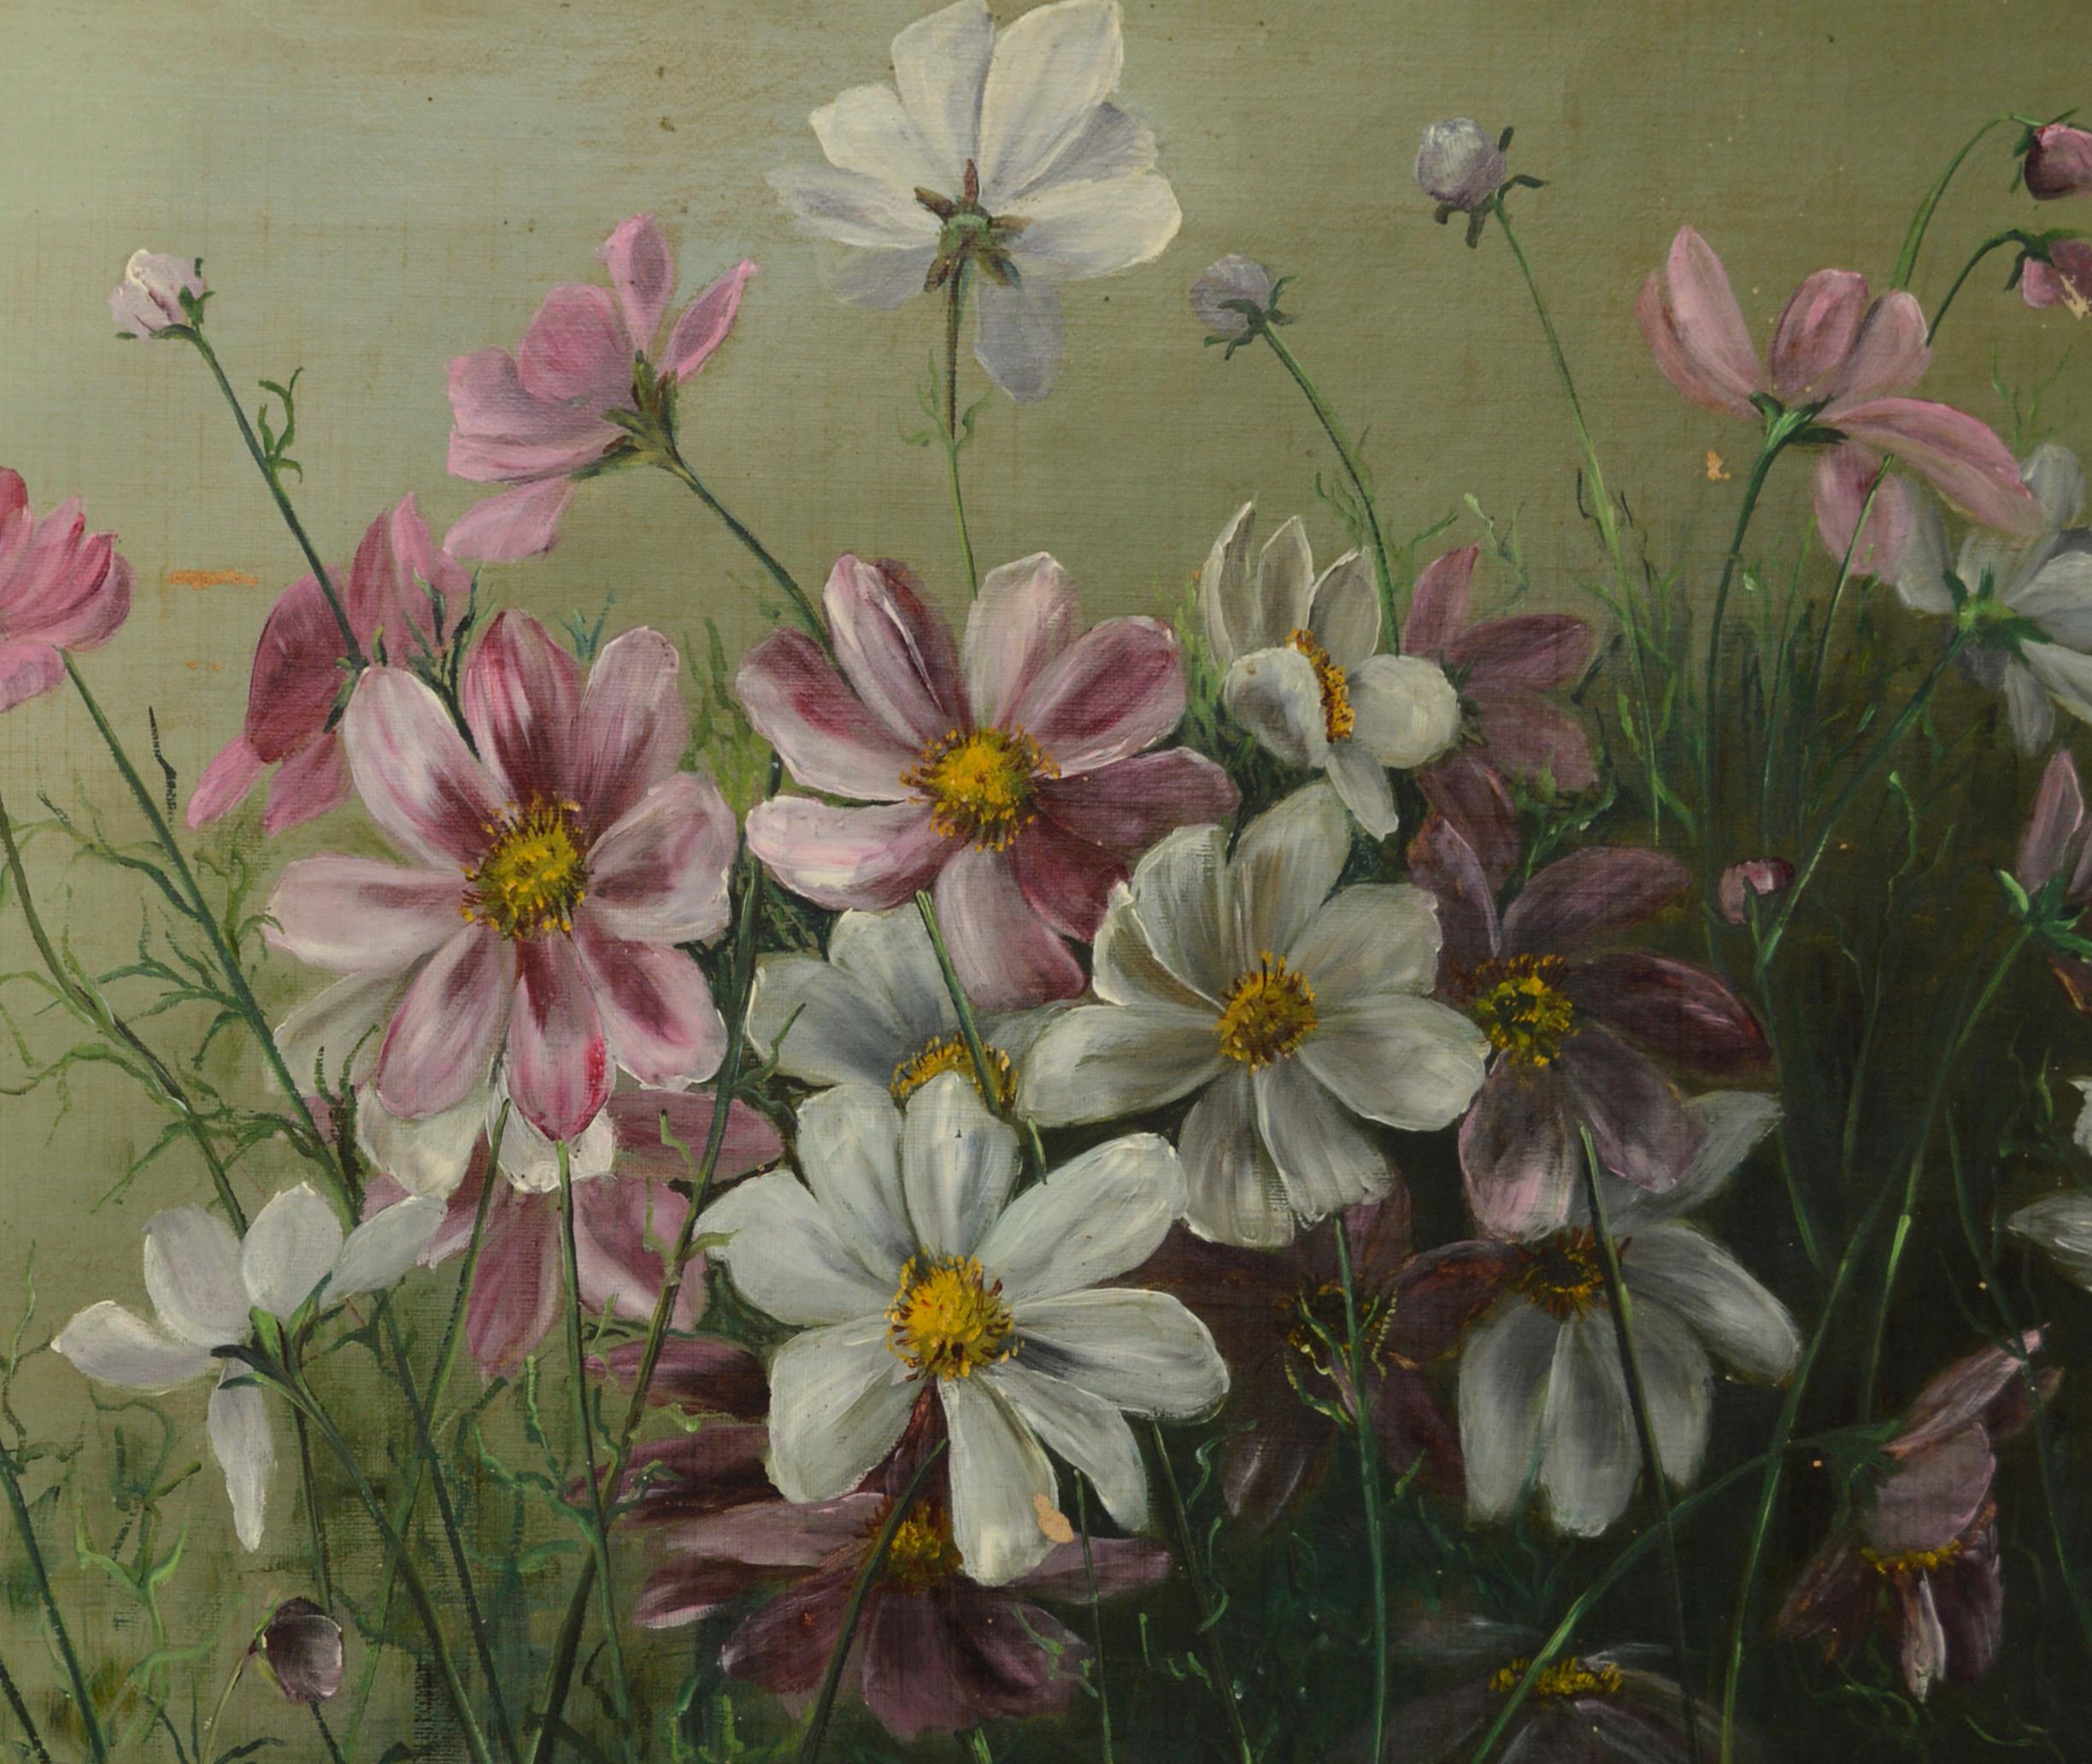 Cosmos Flowers Victorian Era by A. Hotchkiss 1890s - Painting by A Hotchkiss